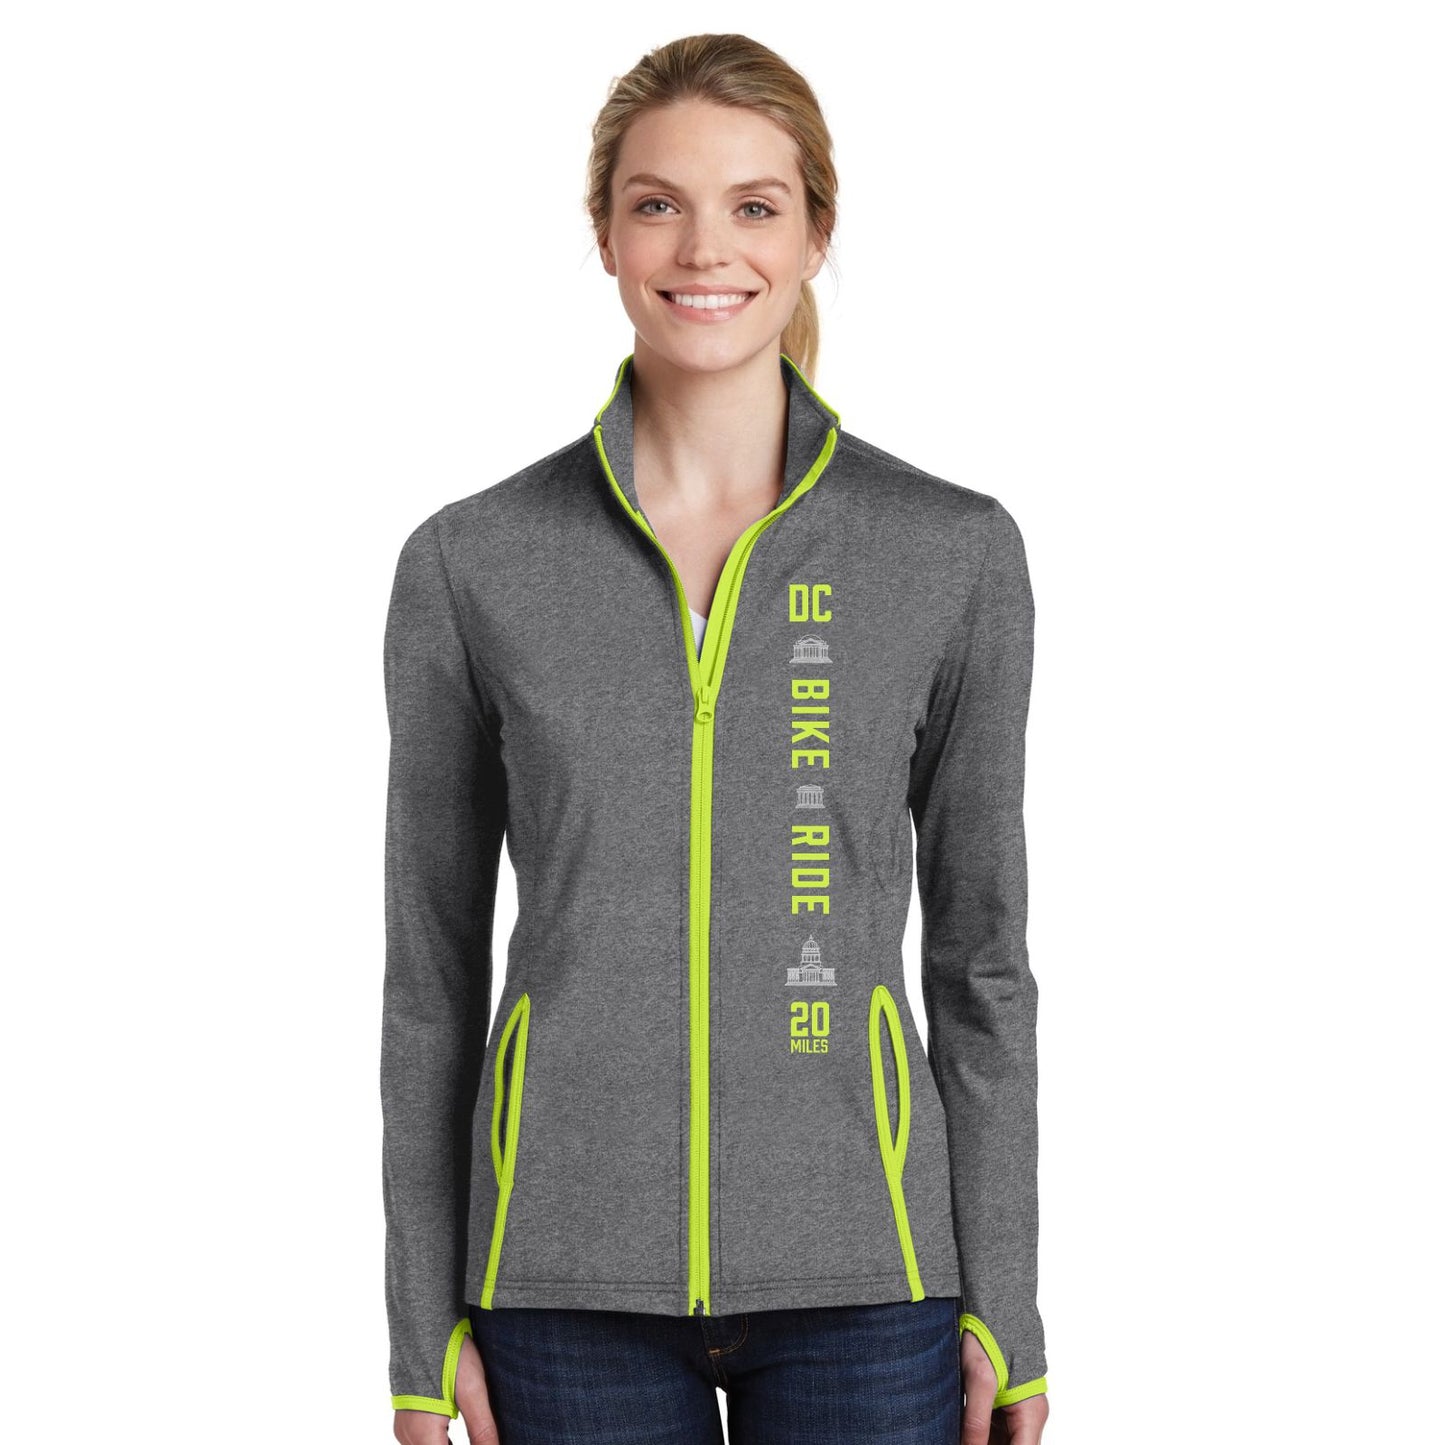 DCBR Women's Stretch Zip Jacket -Charcoal/Charge Green- LCP